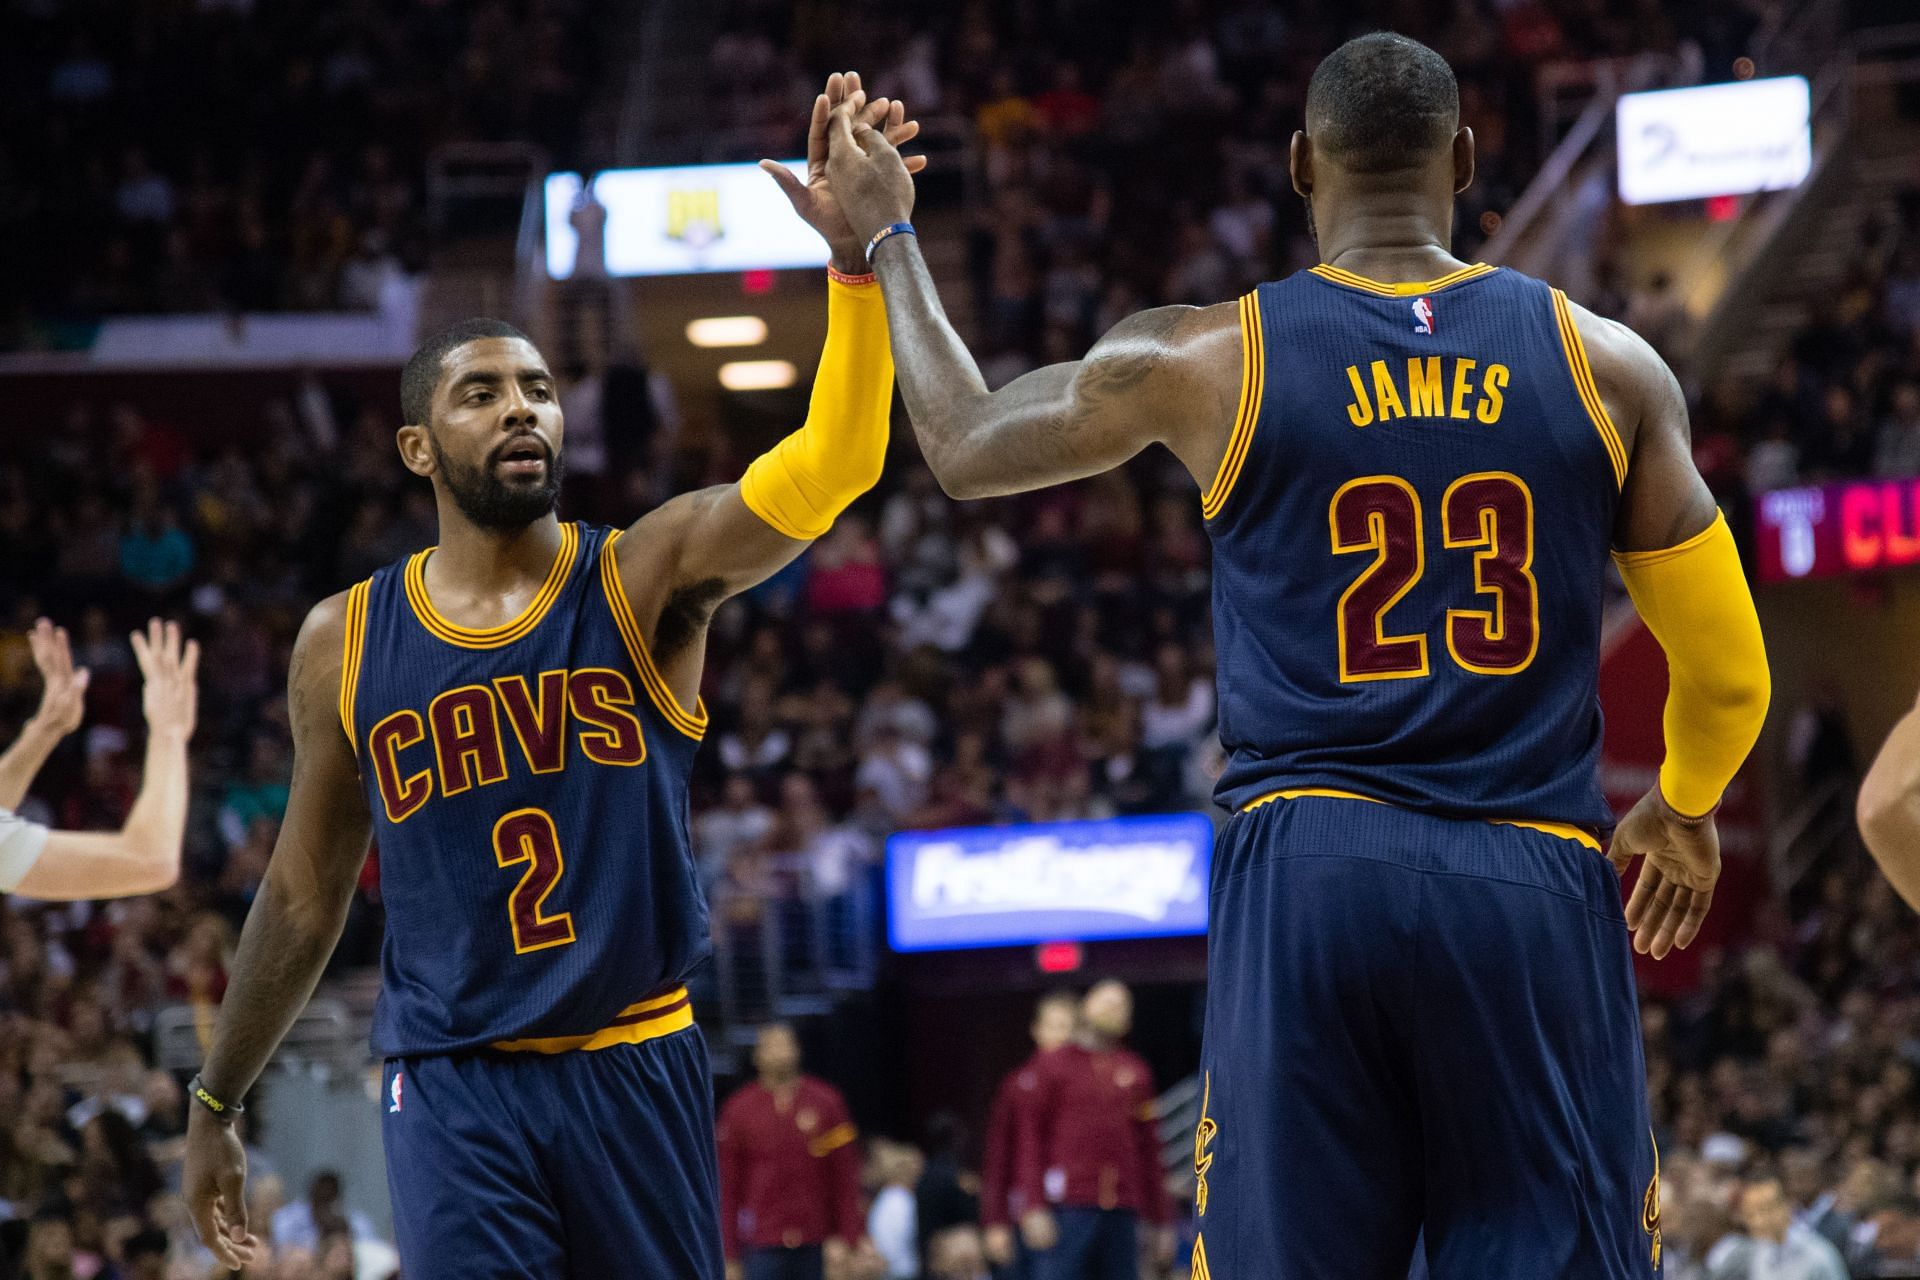 LeBron James and Kyrie Irving during their time together as part of the Cleveland Cavaliers